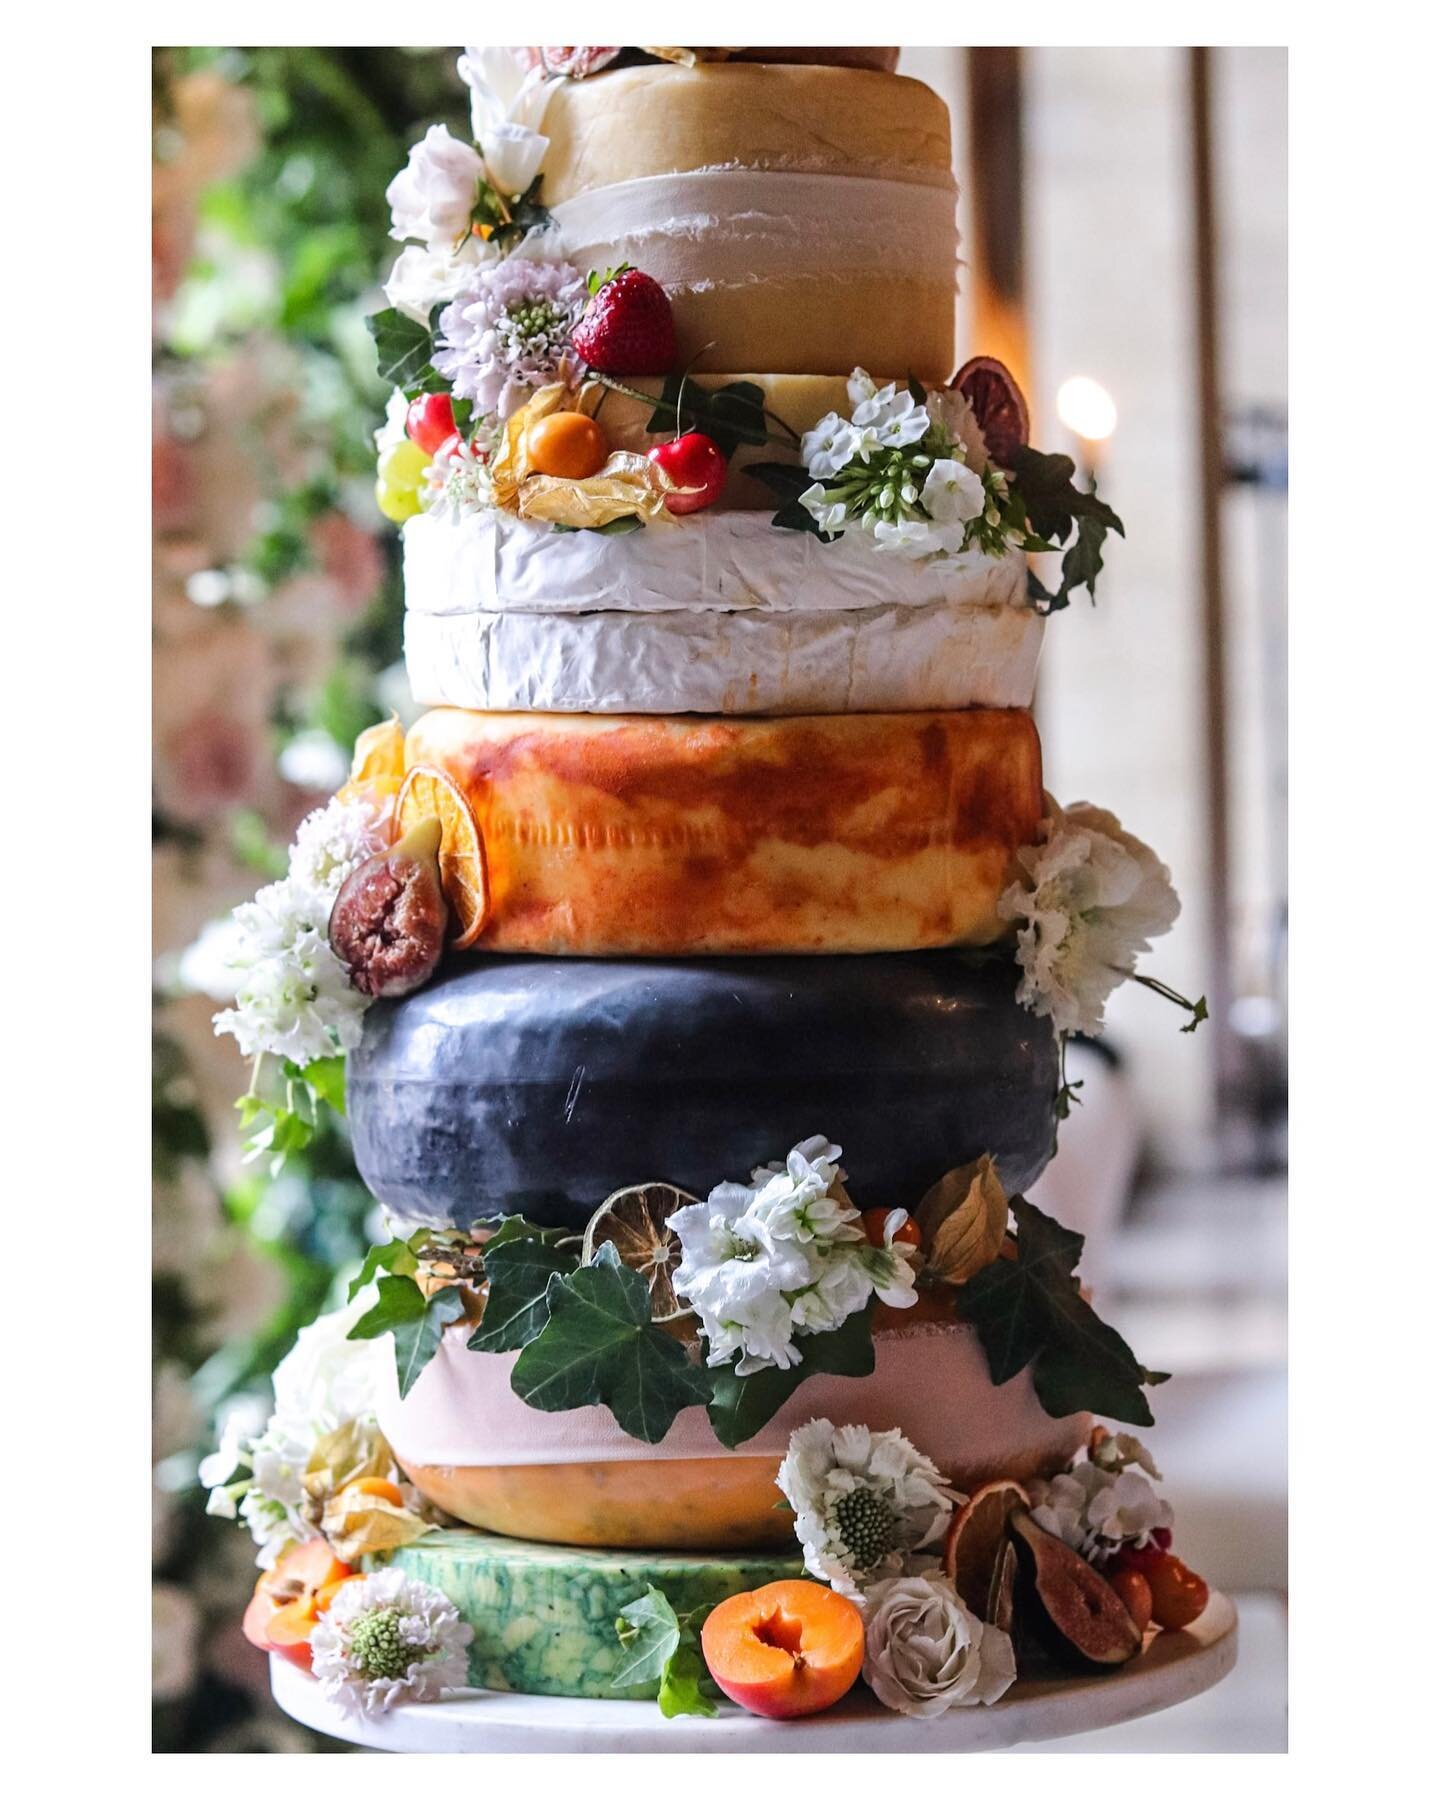 It&rsquo;s a special kinda feeling when a couple chooses a B&amp;B Cheese Wheel Tower for their wedding cake.

And getting to work with my industry pals is the {only} icing on the cake! 

*** swipe through for the cutest room/cake reveal and my cry-g